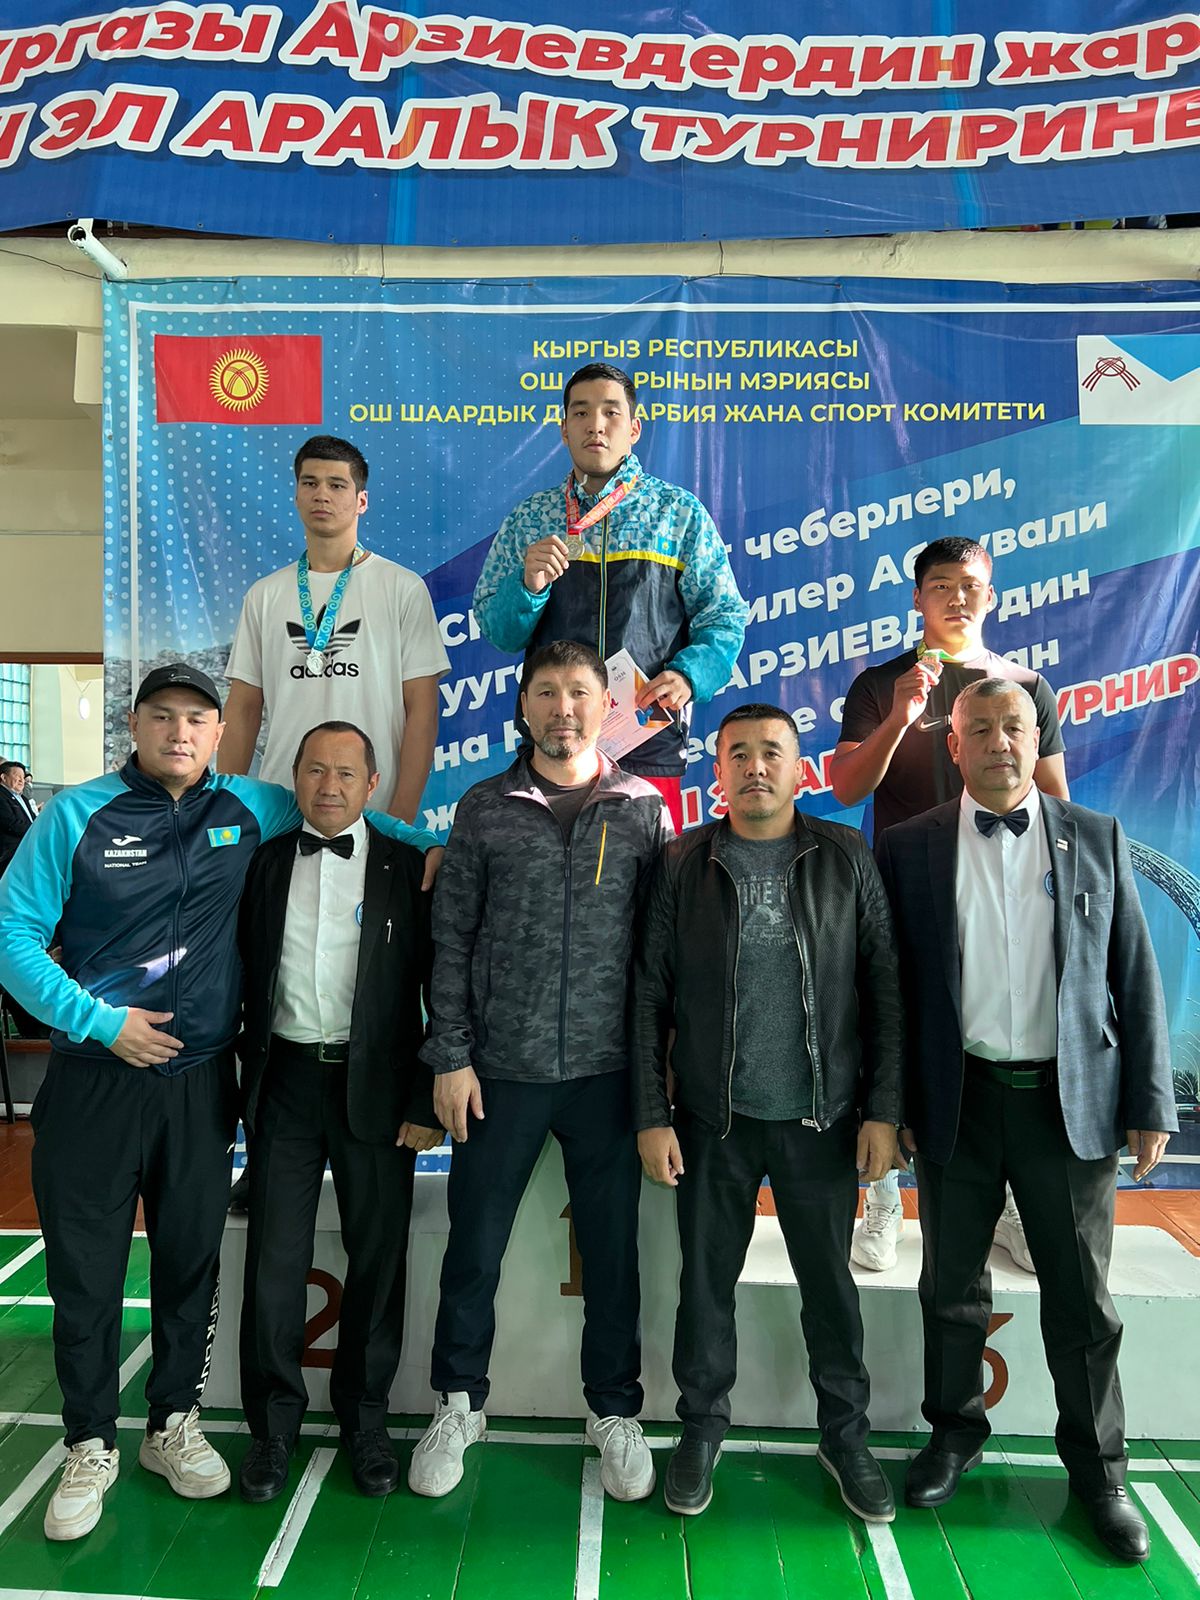 Teaching staff of the Department of Physical Education and Sports of KazNU congratulates S. Yerkin on this achievement!